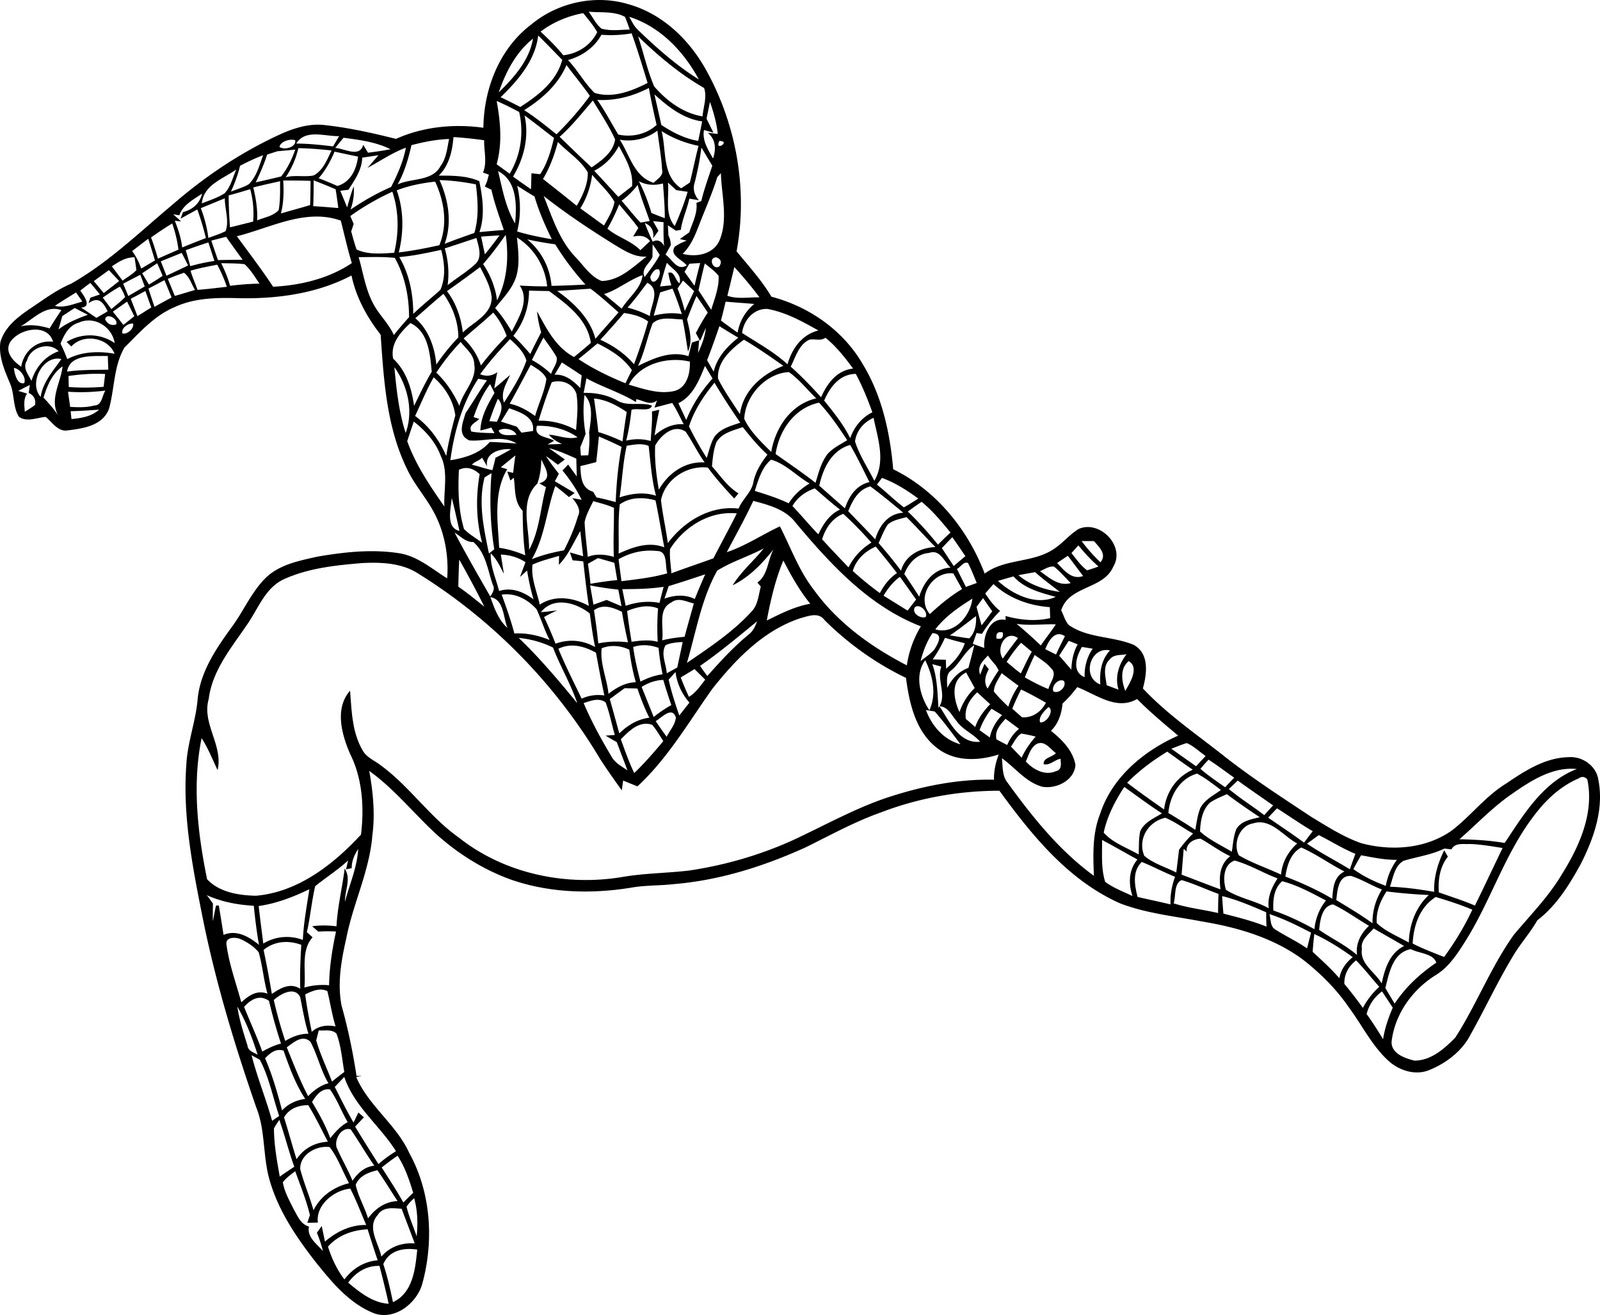 Free Printable Spiderman Coloring Pages For Kids | Projects To Try - Free Printable Spiderman Coloring Pages